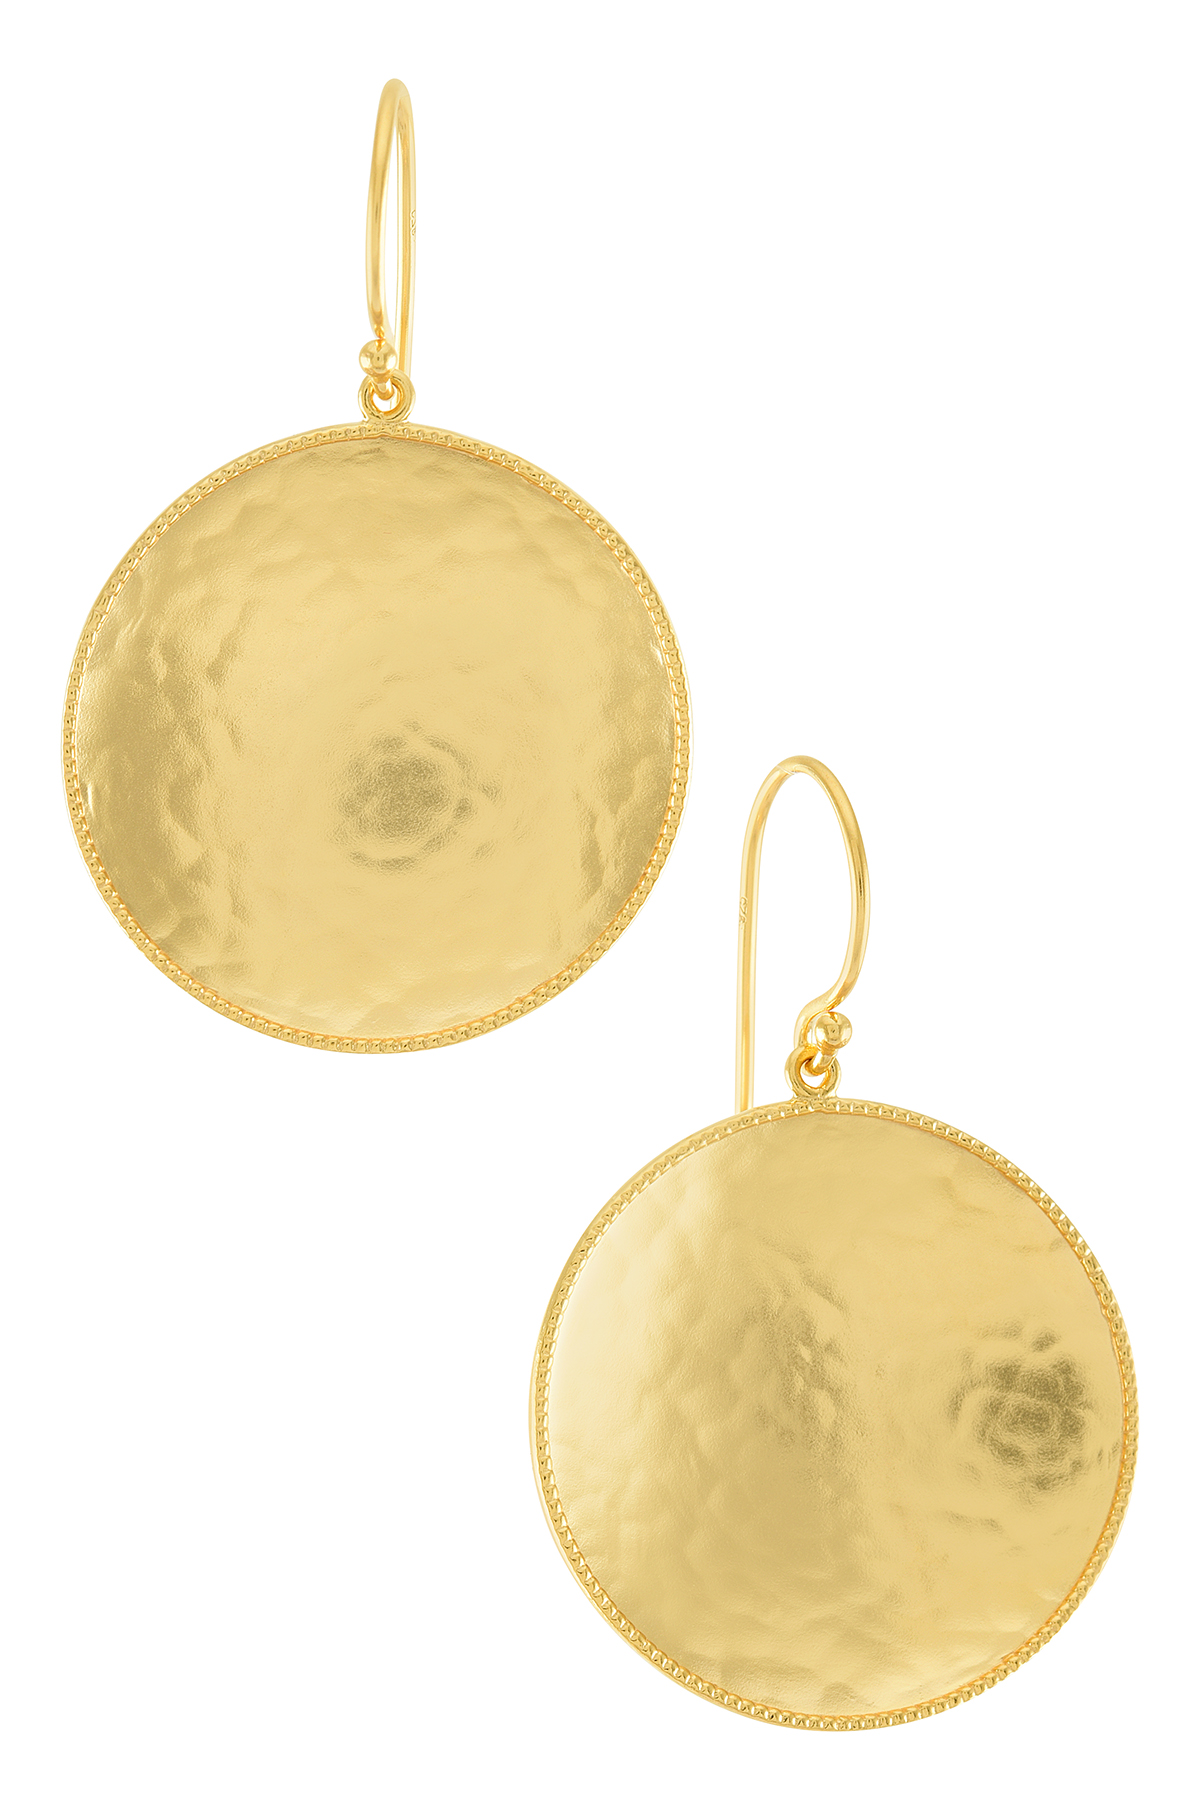 Hammered Disc Earring - 4 sizes! - Zina Kao Exclusives